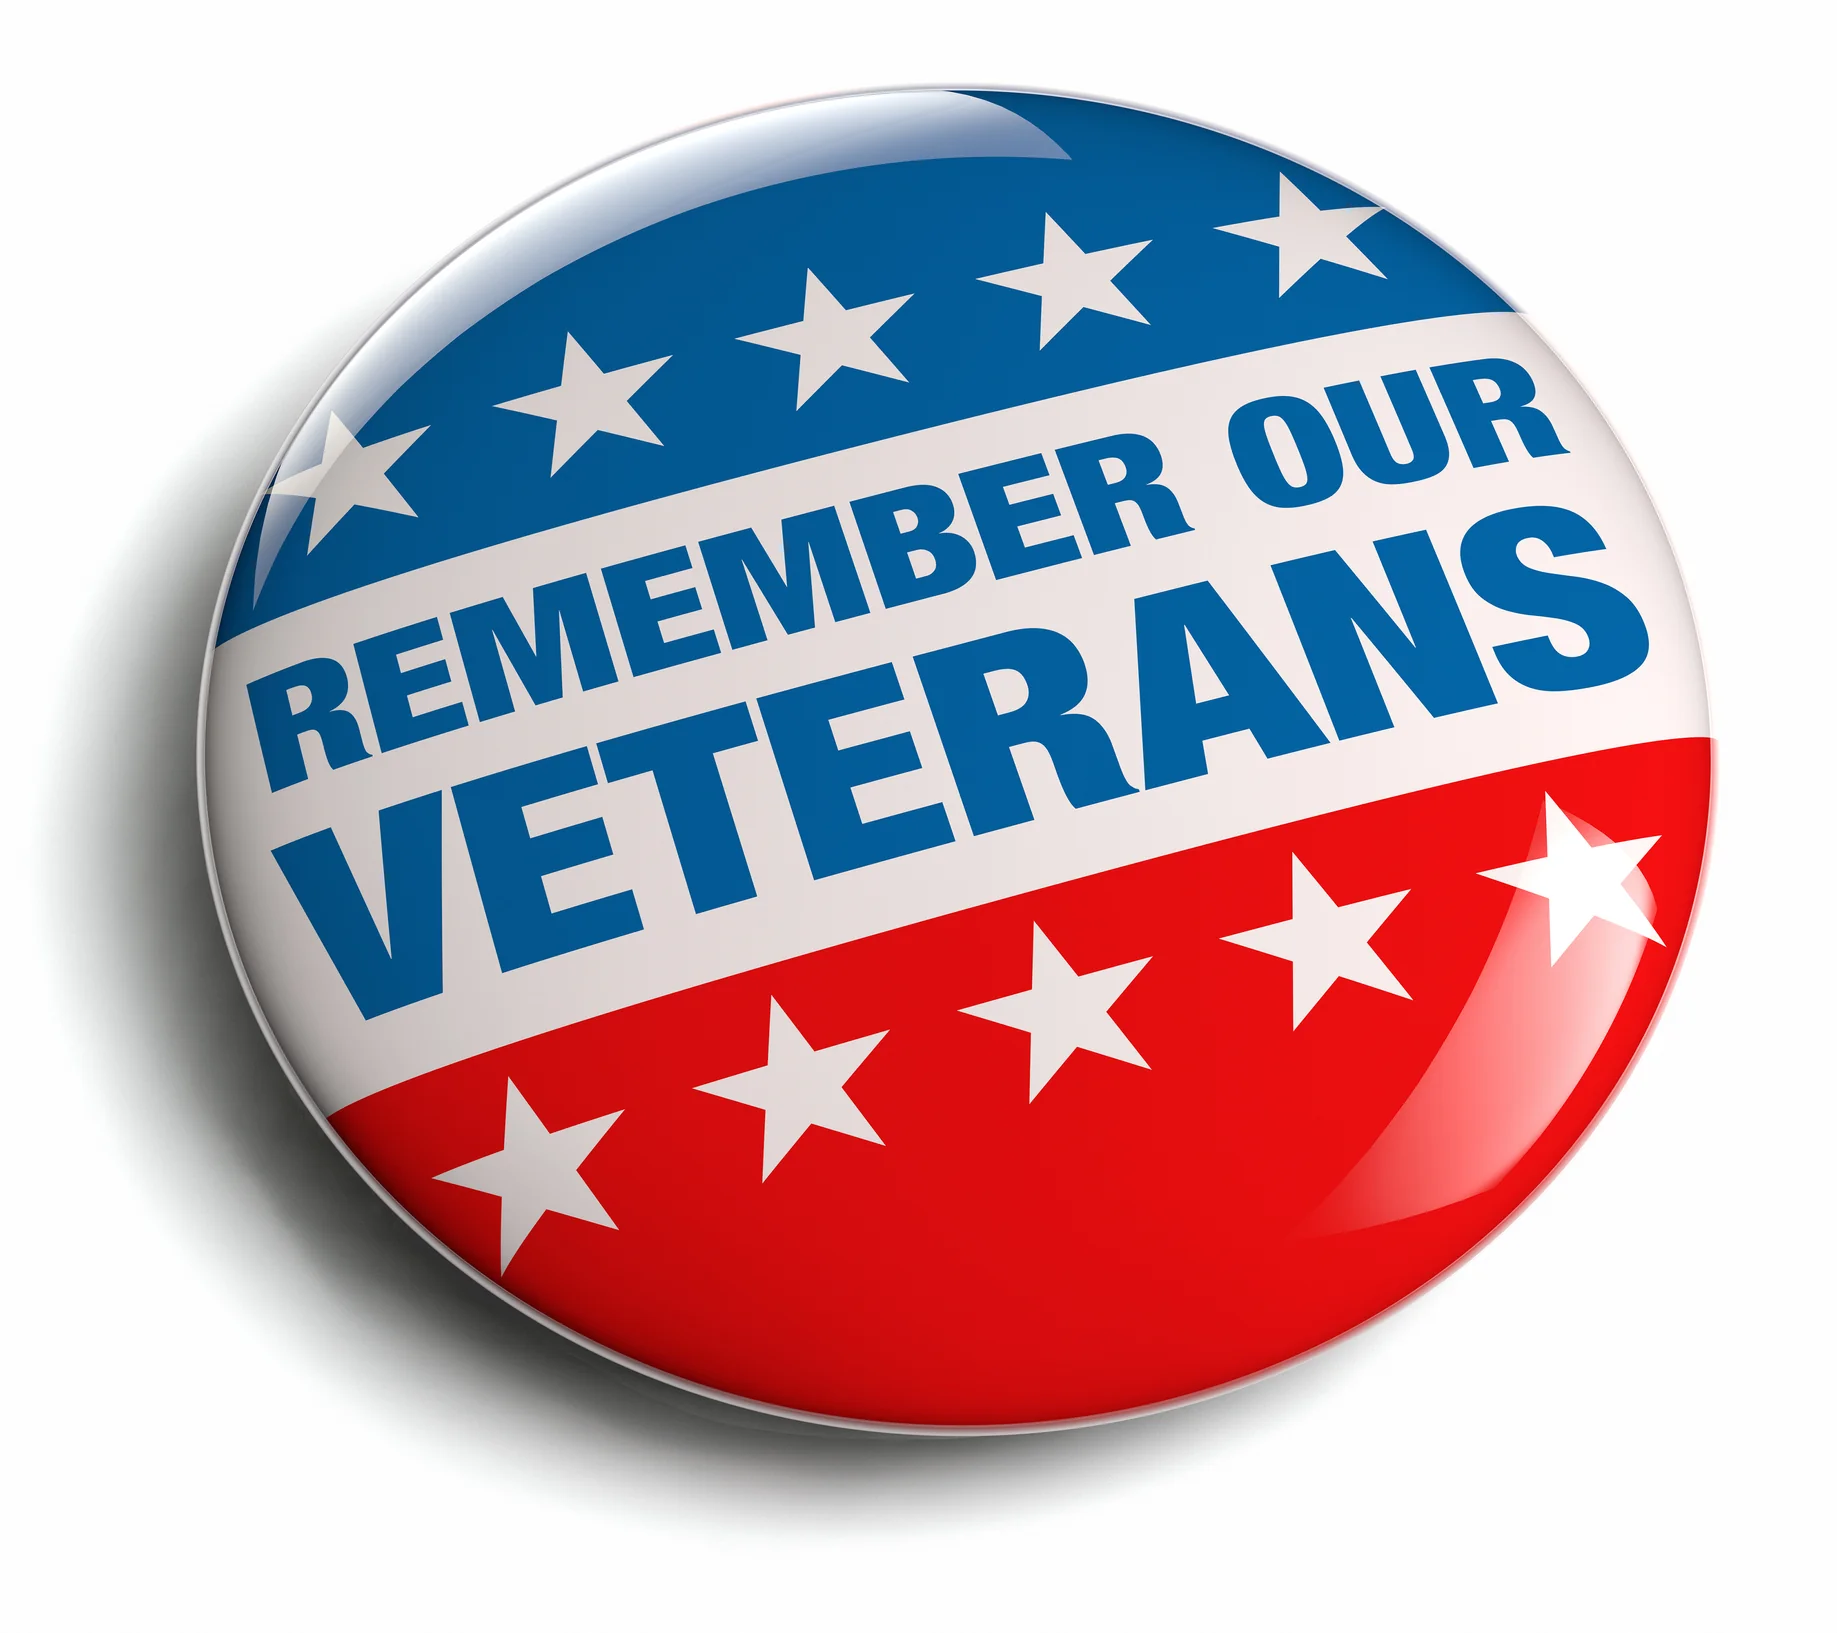 Remember our veterans button